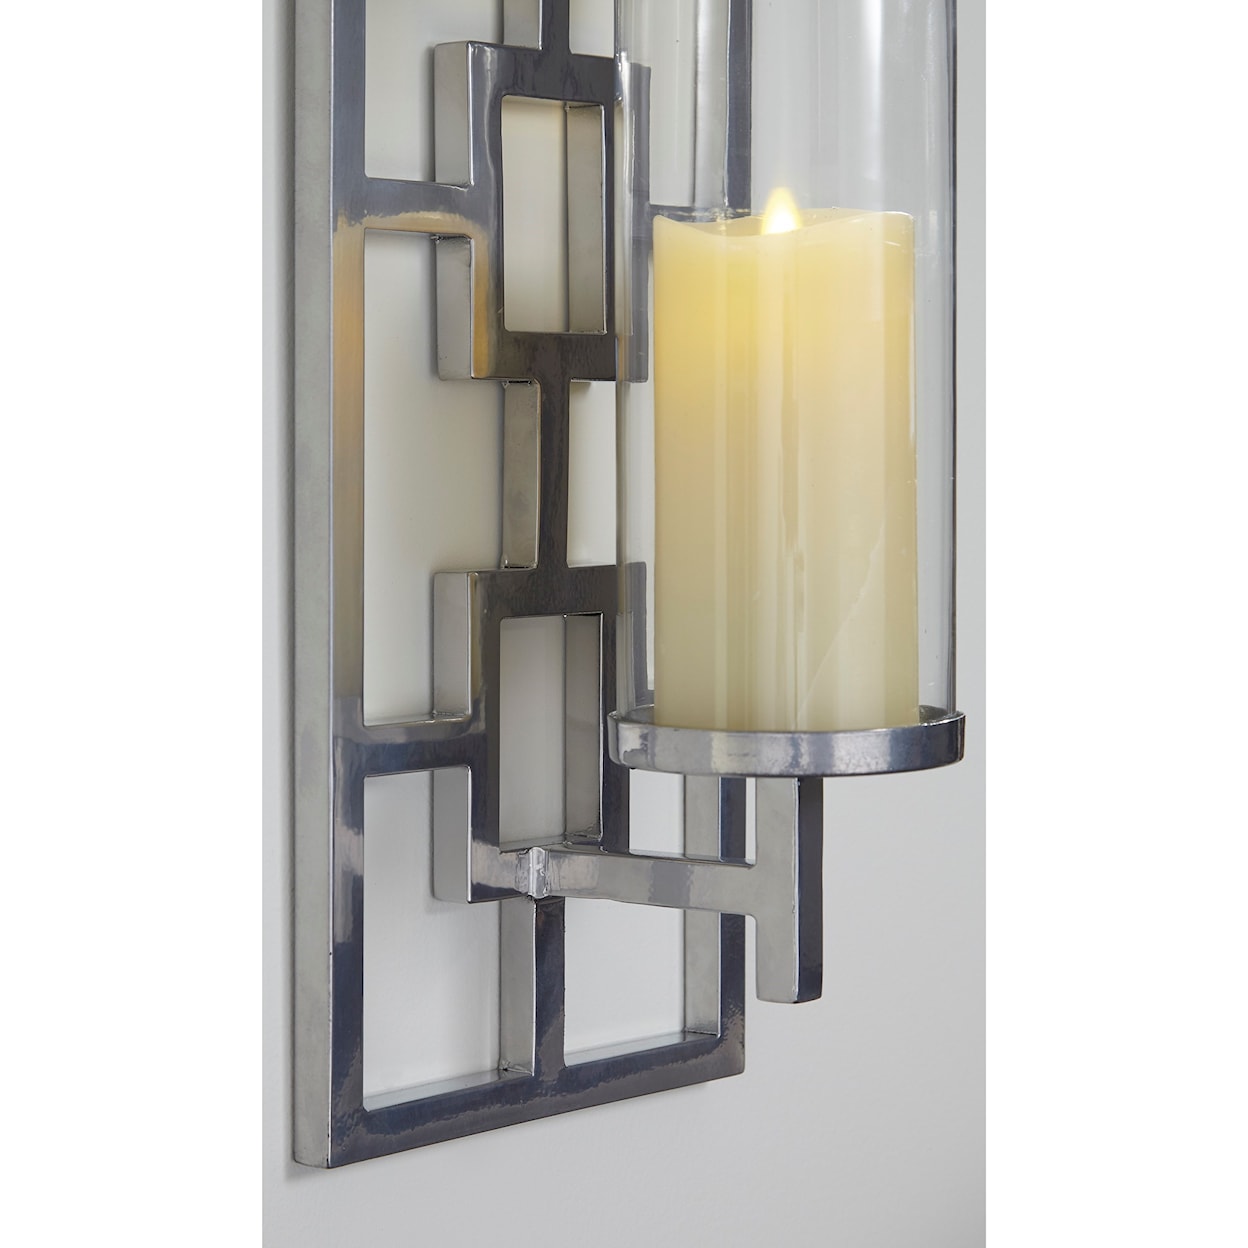 Michael Alan Select Wall Art Brede Silver Finish Wall Sconce